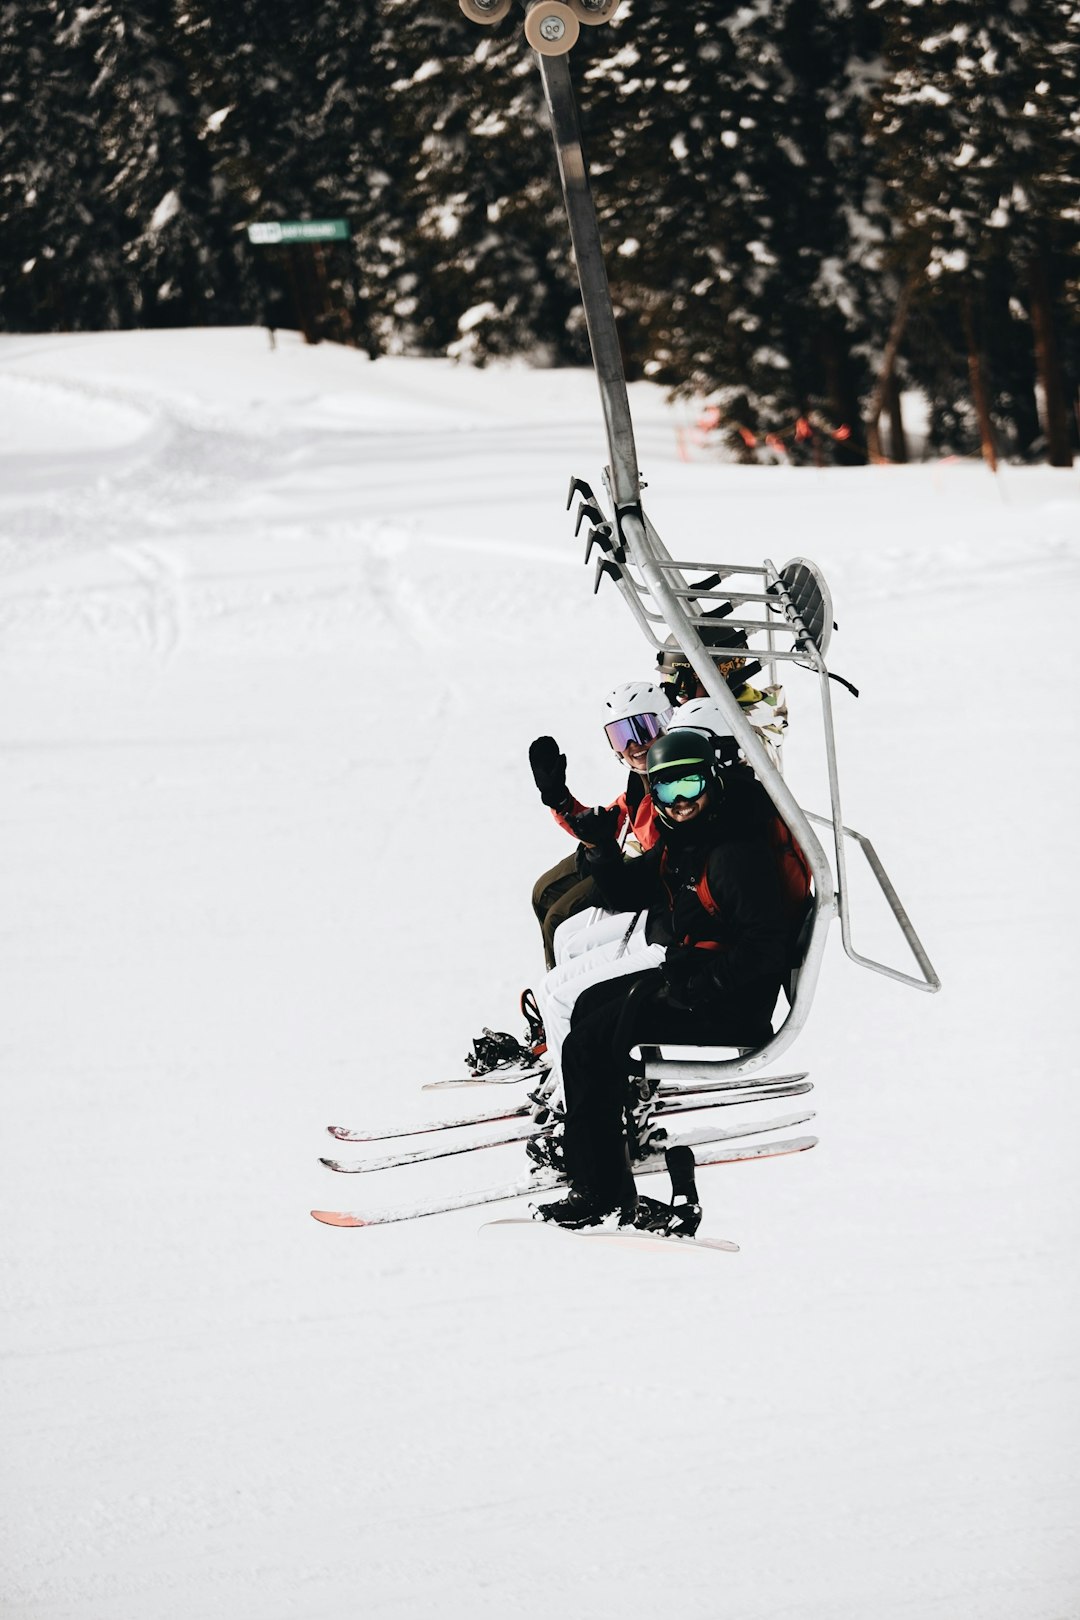 man in black jacket and red pants riding ski blades on snow covered ground during daytime